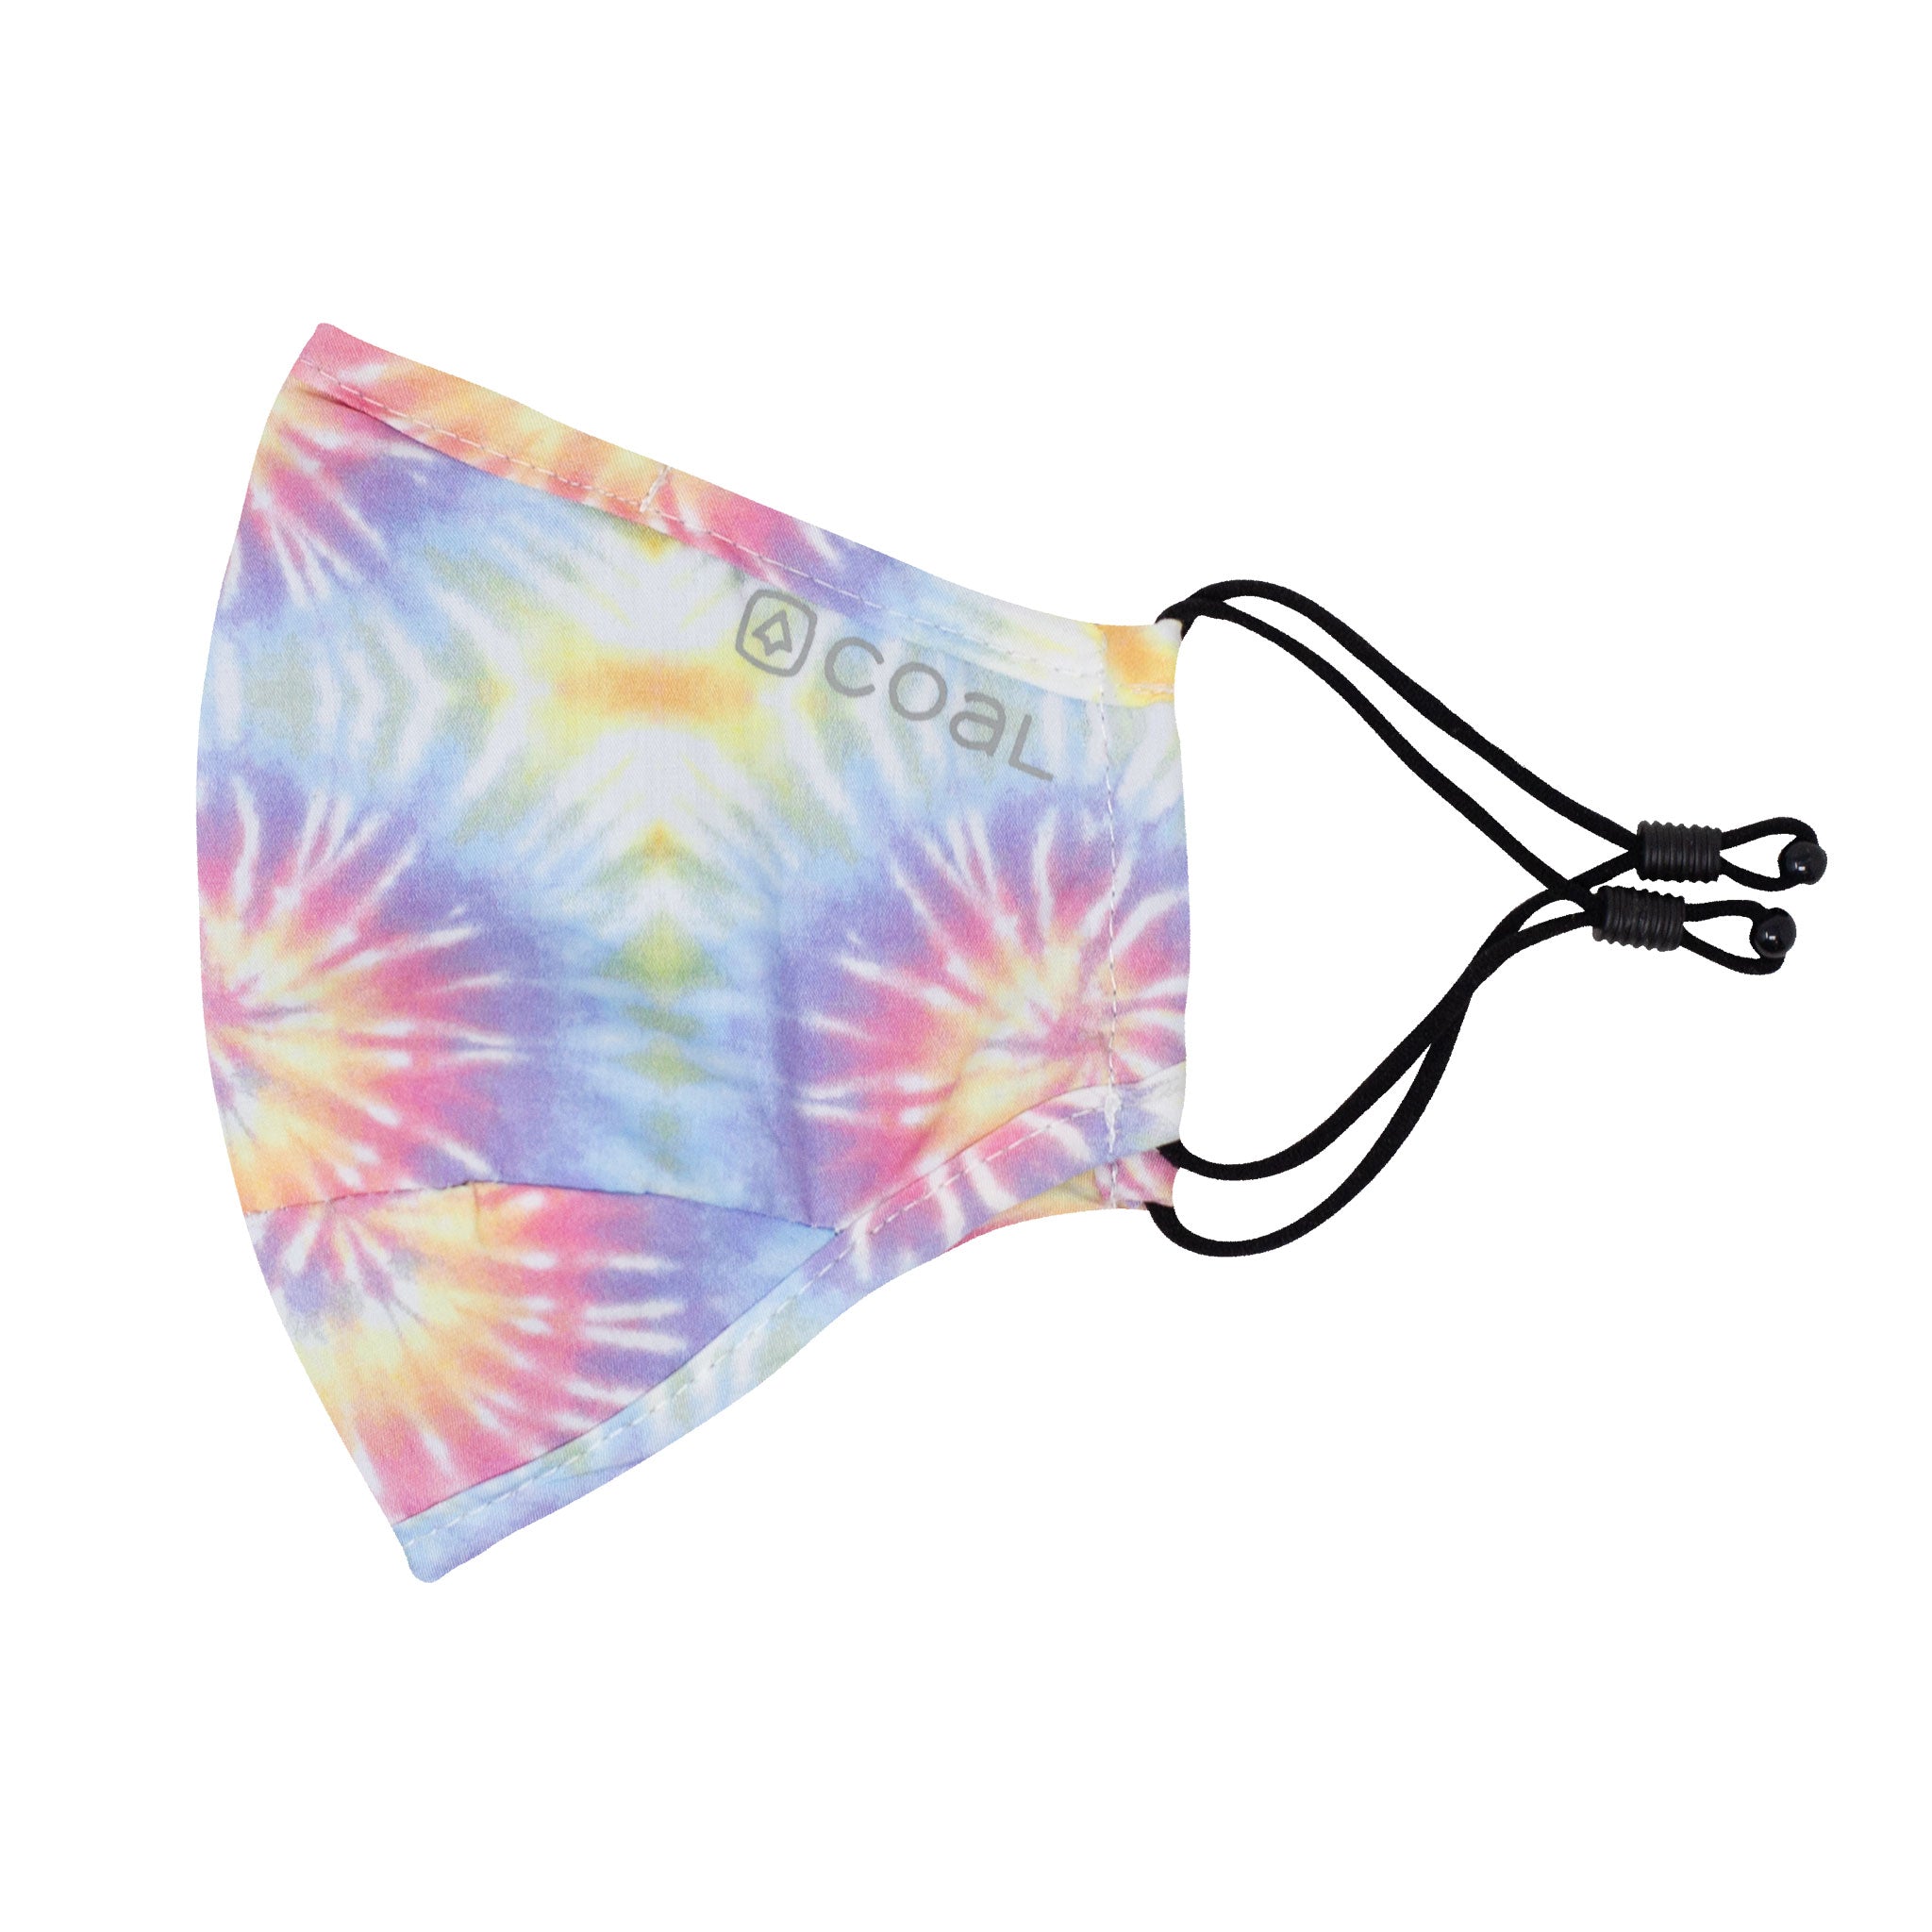 The Ergo Face Mask with Filter Pocket - Tie Dye Print, Pastel